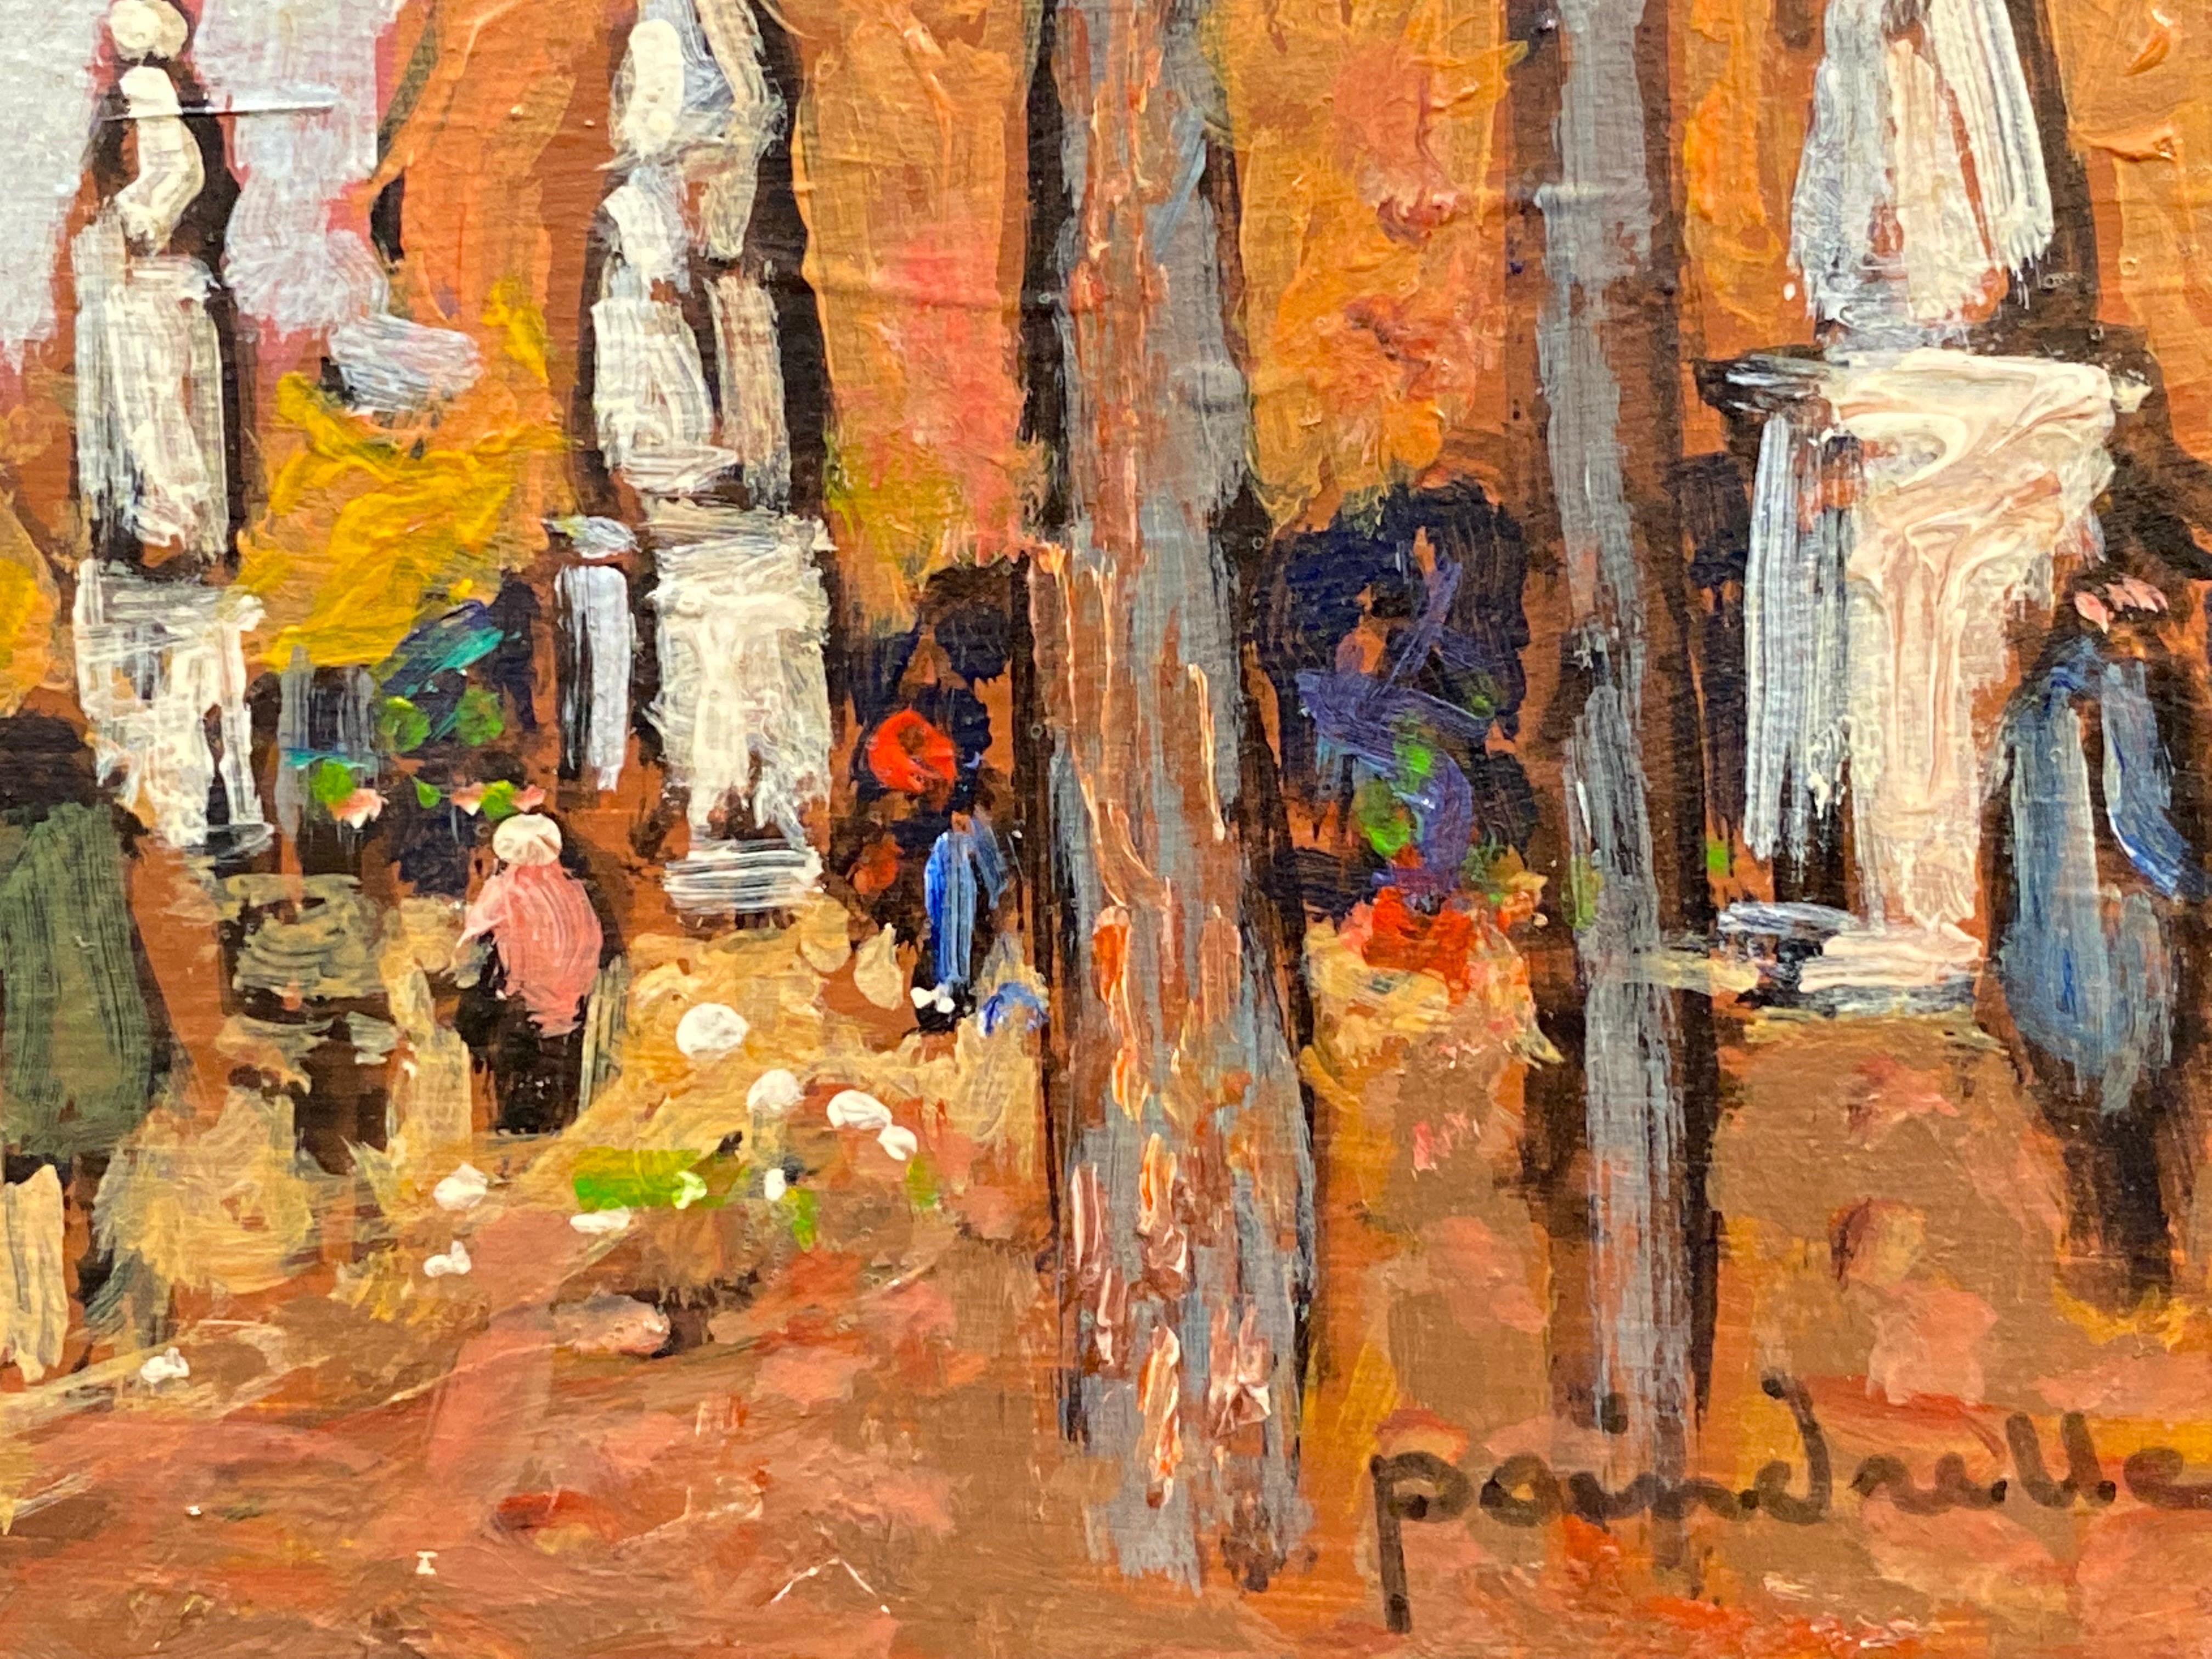 Artist/ School: Patrice Poindrelle (French b. 1954), signed on front and back, inscribed verso

Title: Luxembourg Gardens, Paris

Medium: oil painting on board, unframed.

Size:  painting: 4 x 7 inches     

Provenance: private collection, Paris.